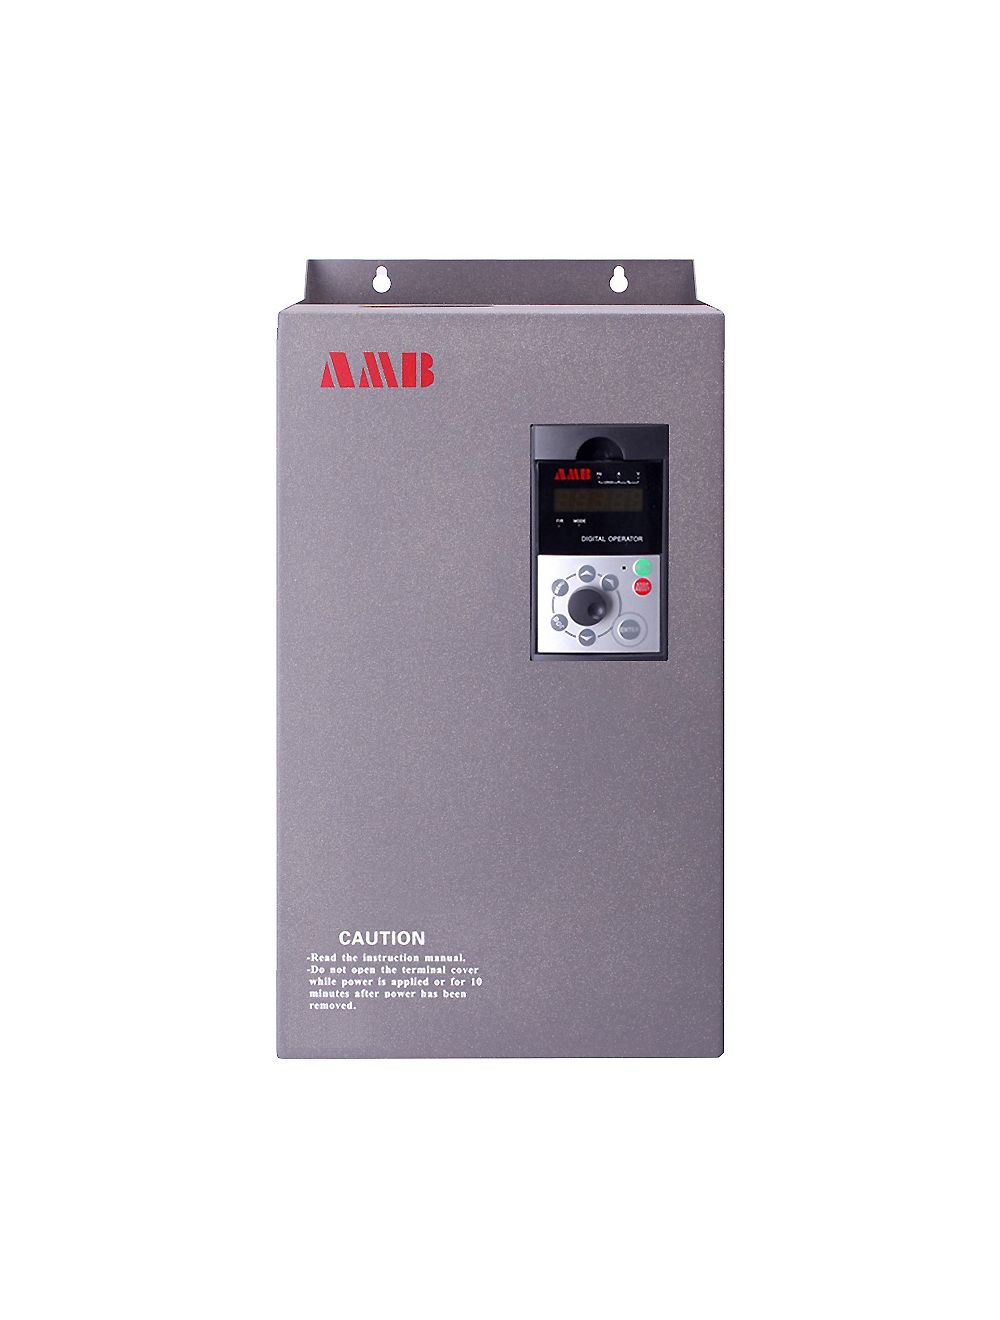 New In stock for sale, AMB VFD Frequency Converter AMB100-400G-T3